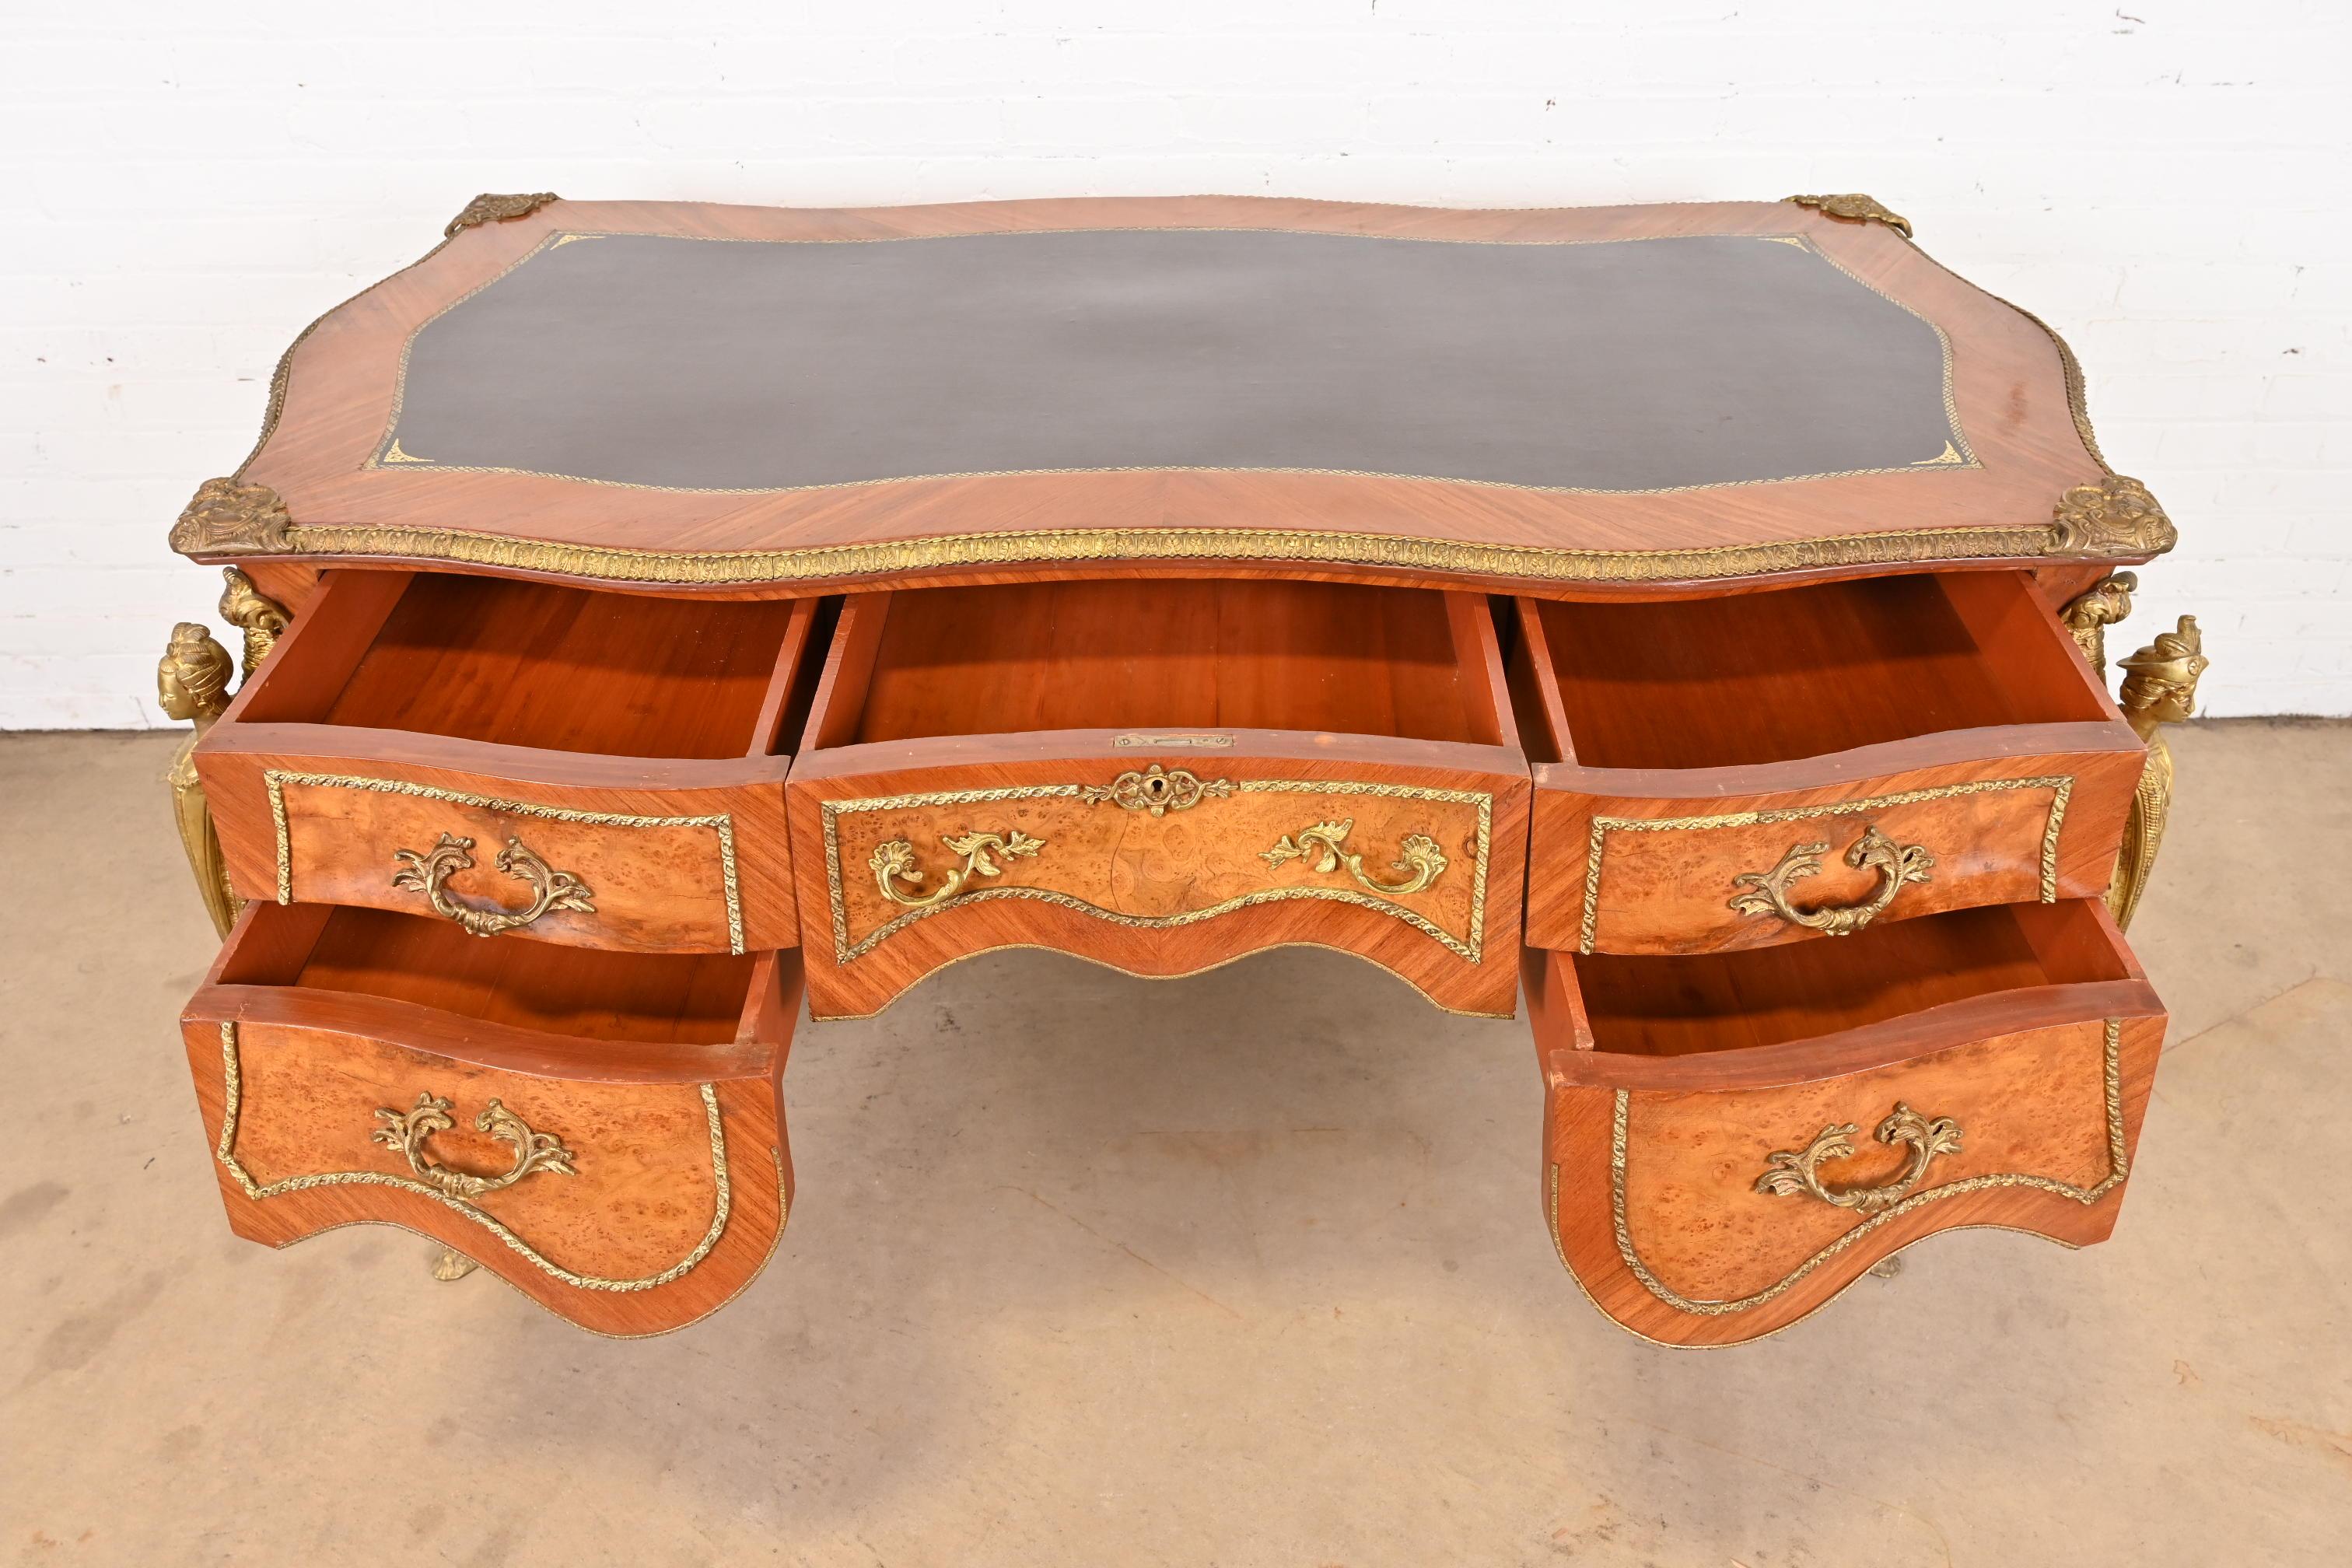 French Louis XV Kingwood and Burl Wood Bureau Plat Leather Top Desk with Ormolu For Sale 4